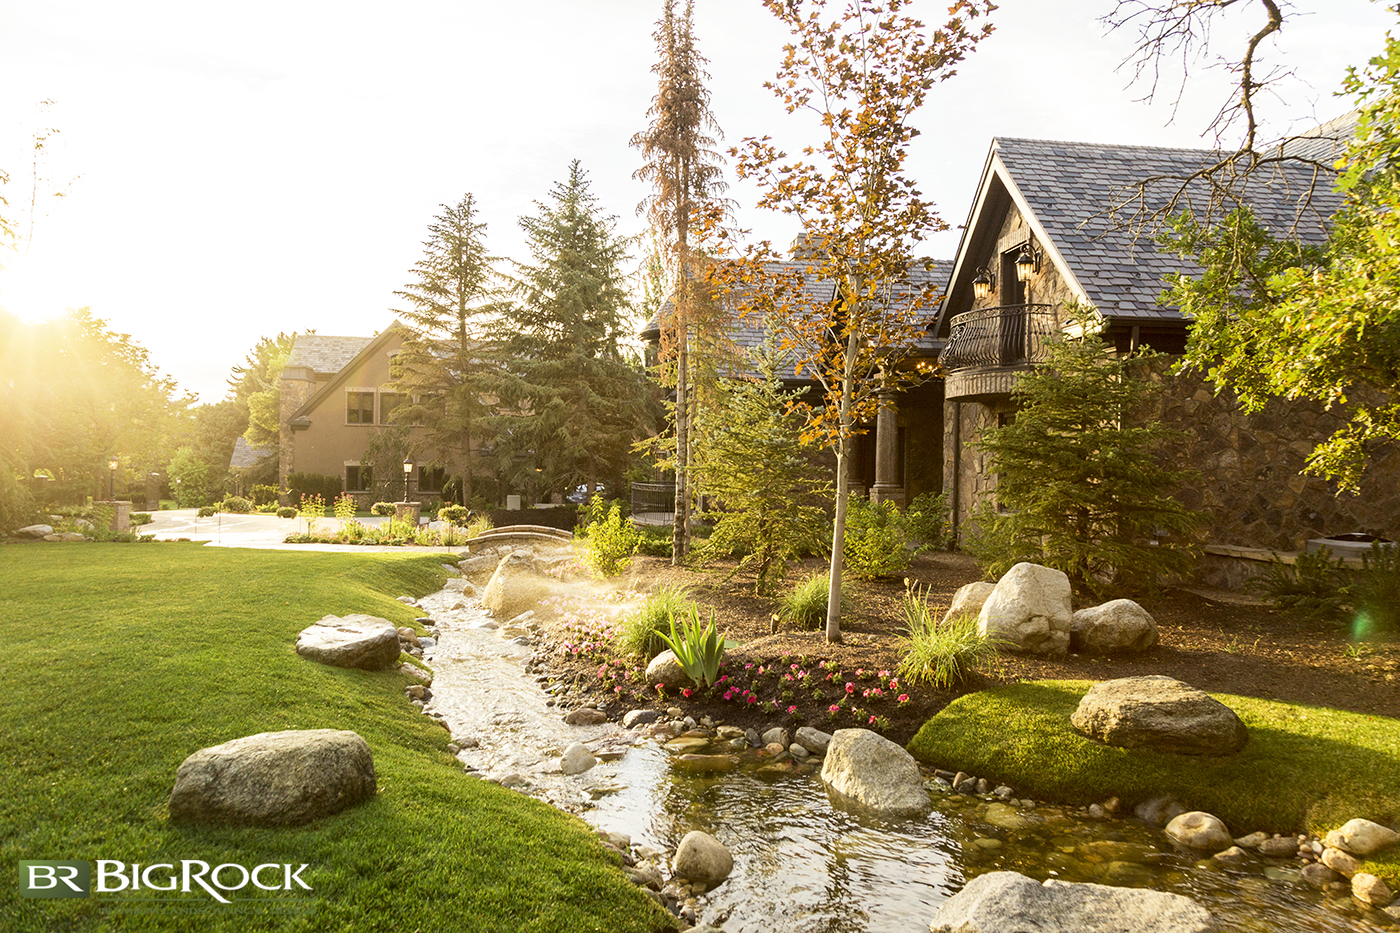 Bring nature into your luxury front yard landscaping with a river that runs through your yard. Big Rock Landscaping can install and design your natural escape at home.